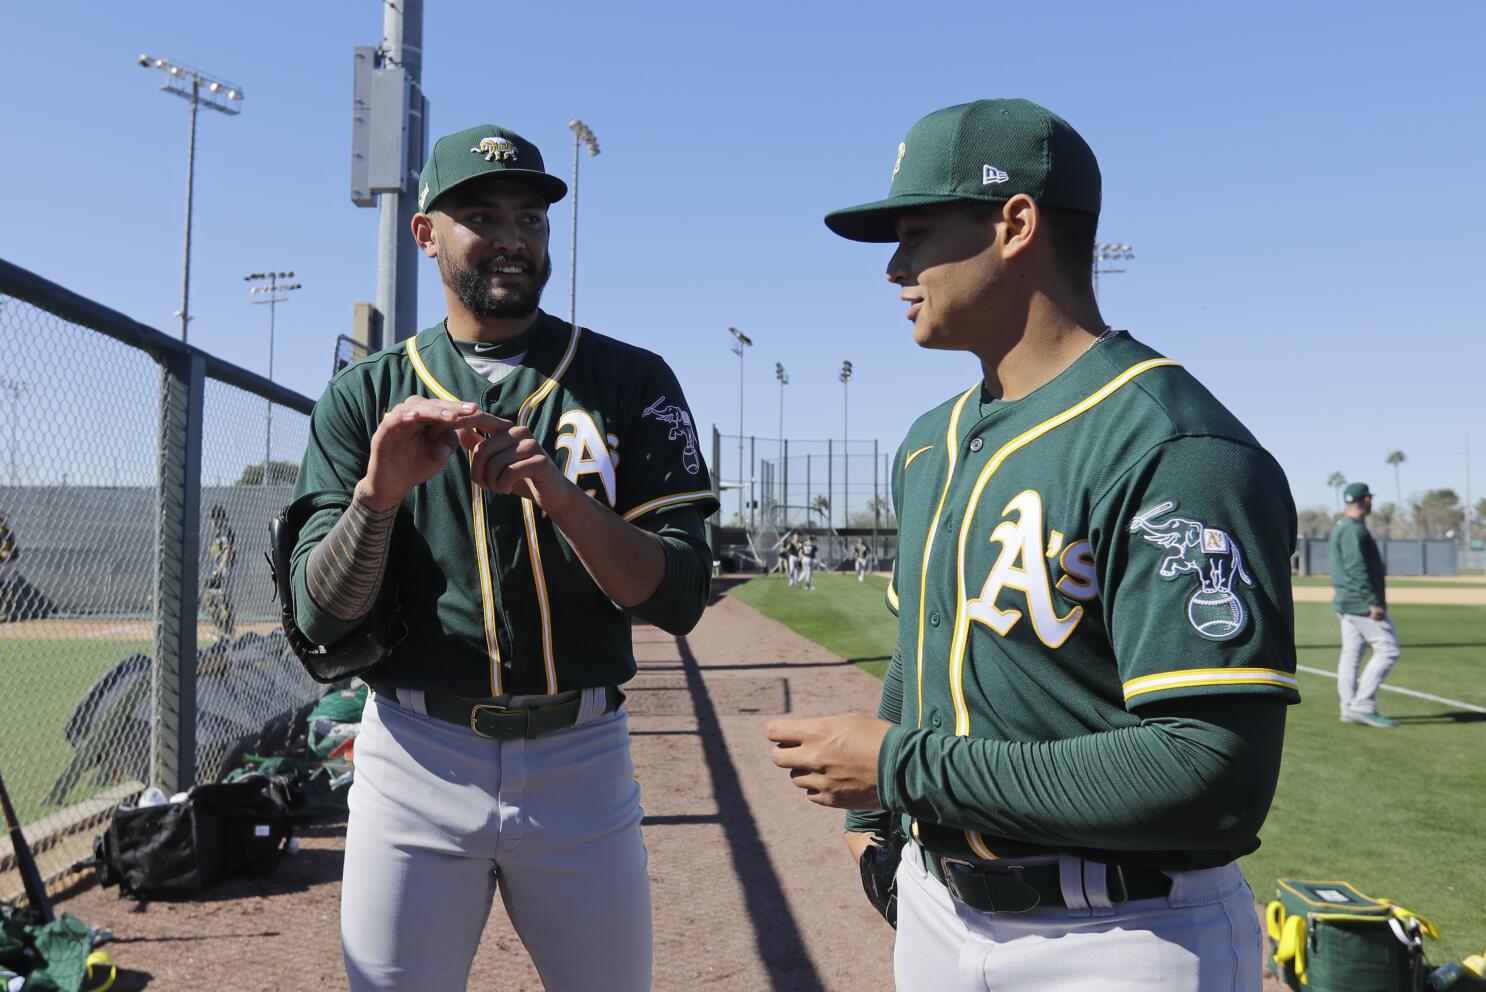 Oakland A's prospect watch: 2019 rosters for minor league